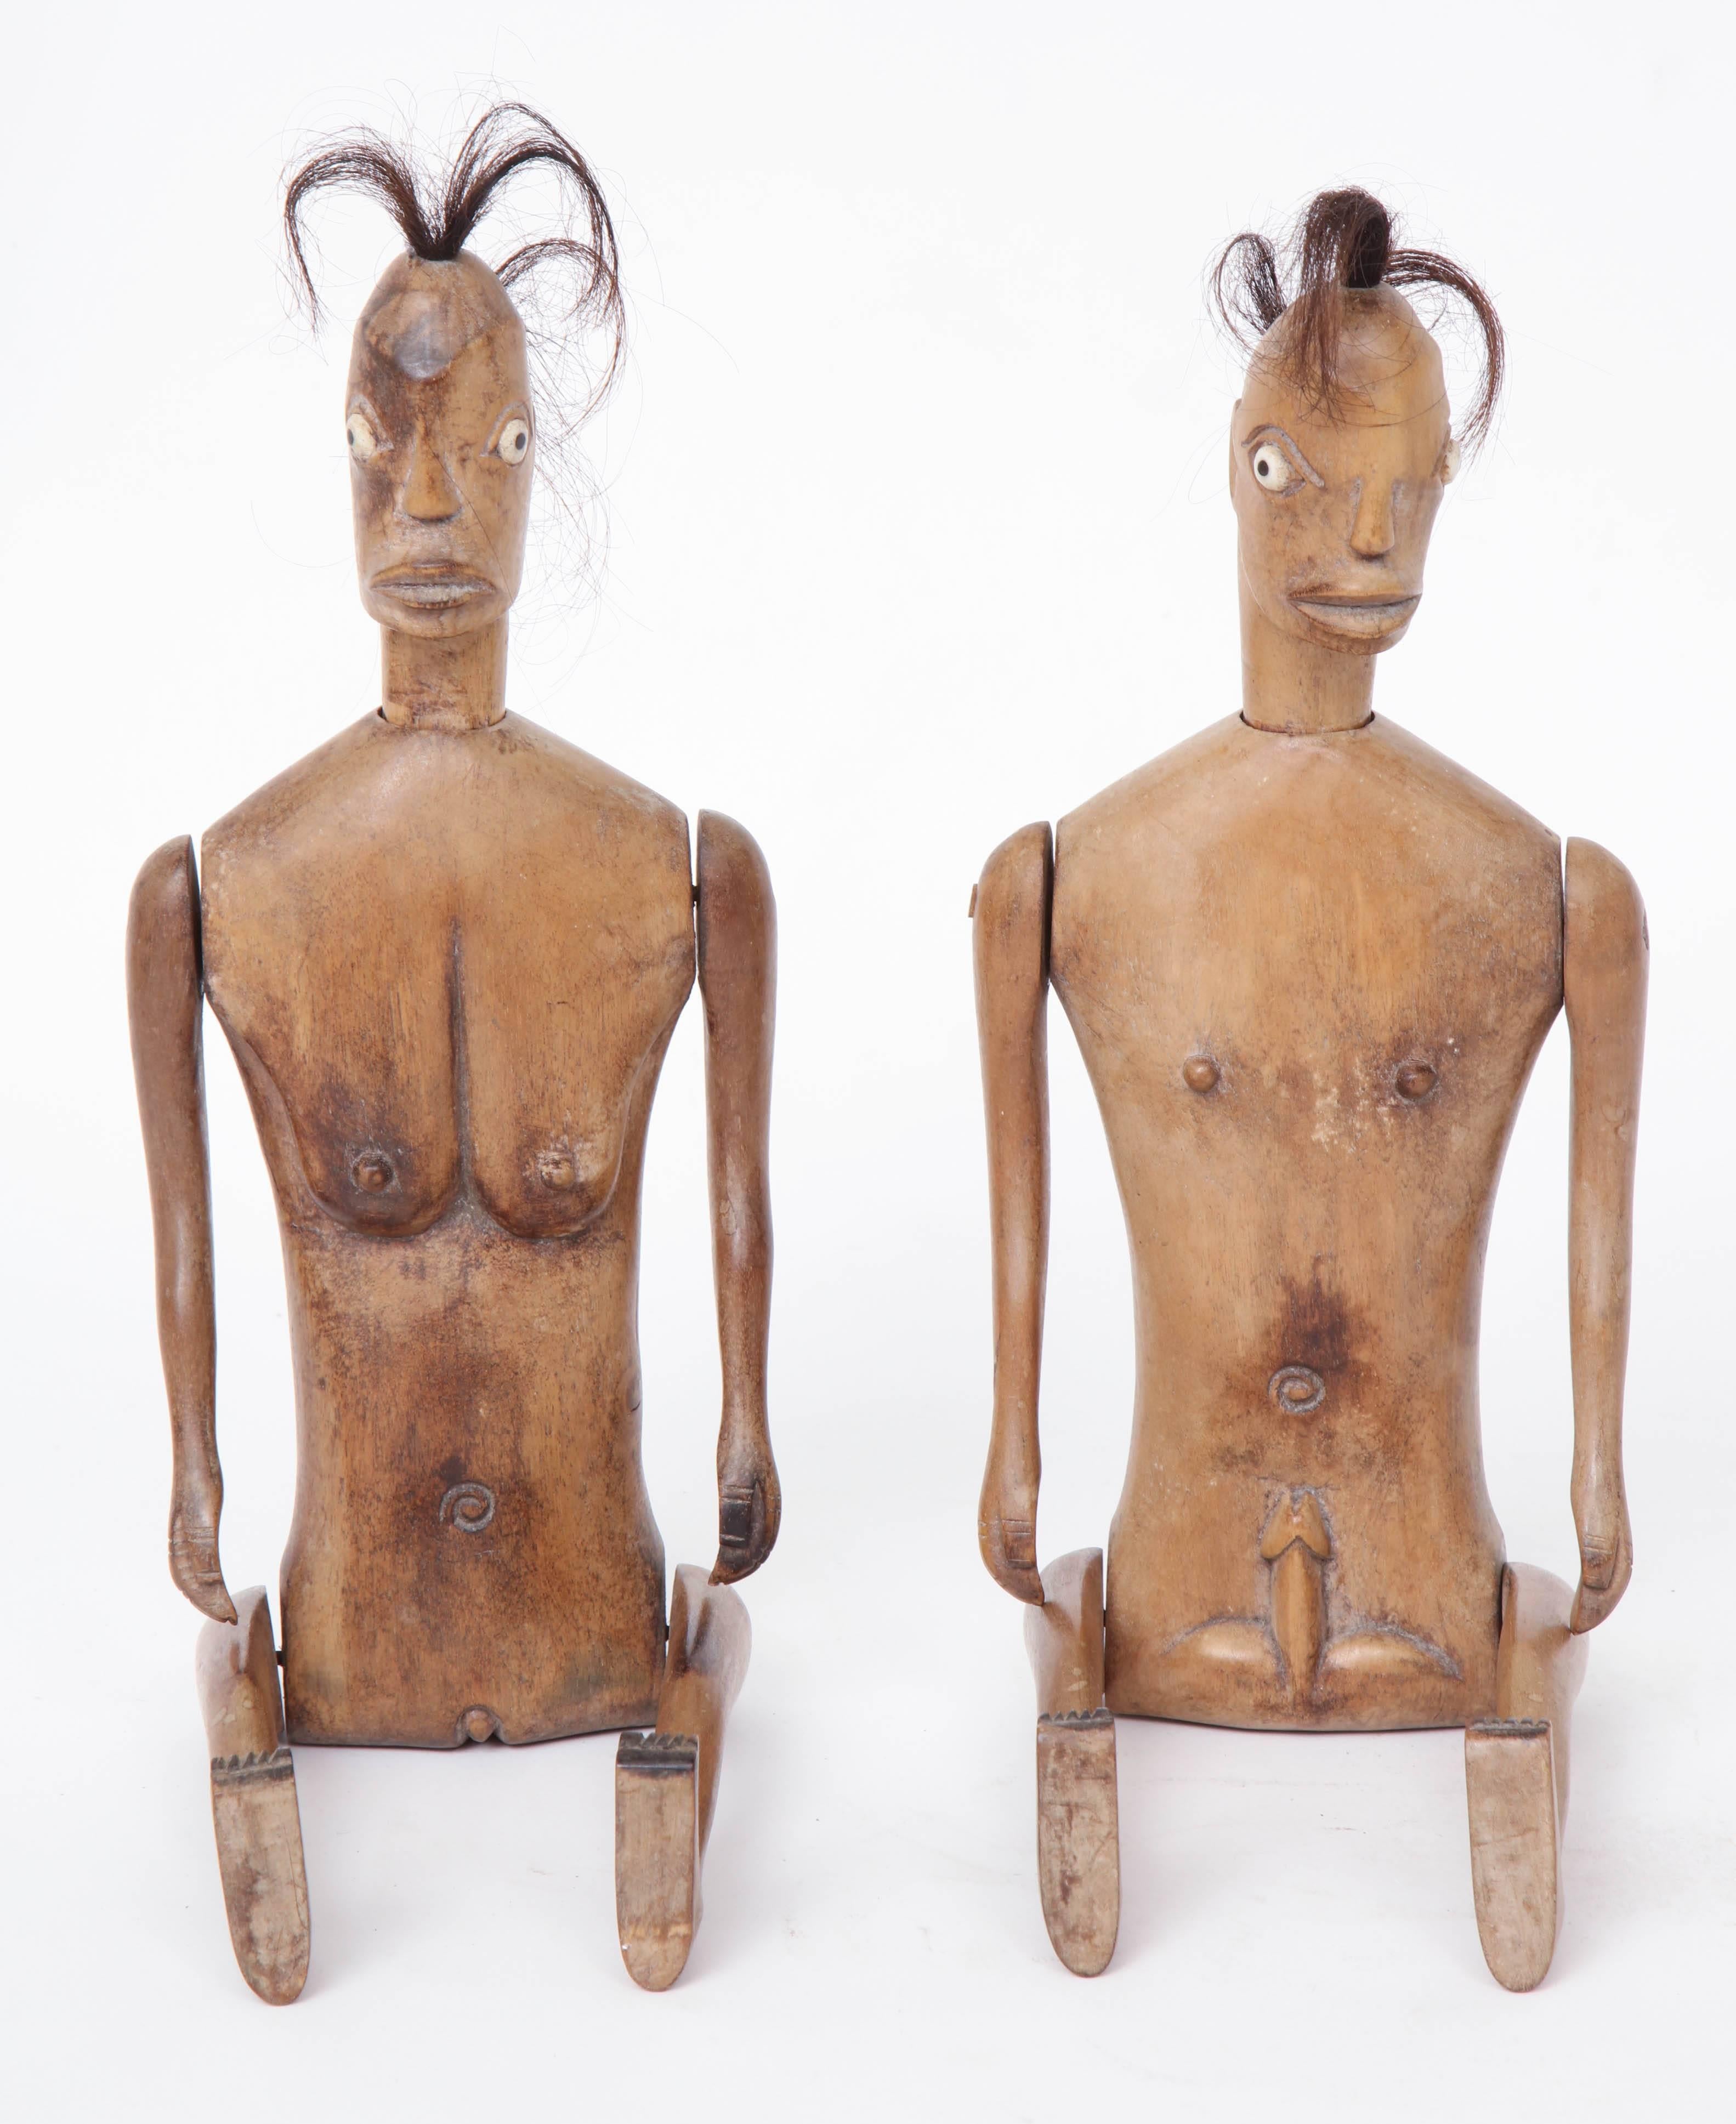 Two articulating Indonesian figures from Lumbock, near Bali, early 20th century, man and woman. Arms, legs and head move. Carved wood, paint and animal hair.